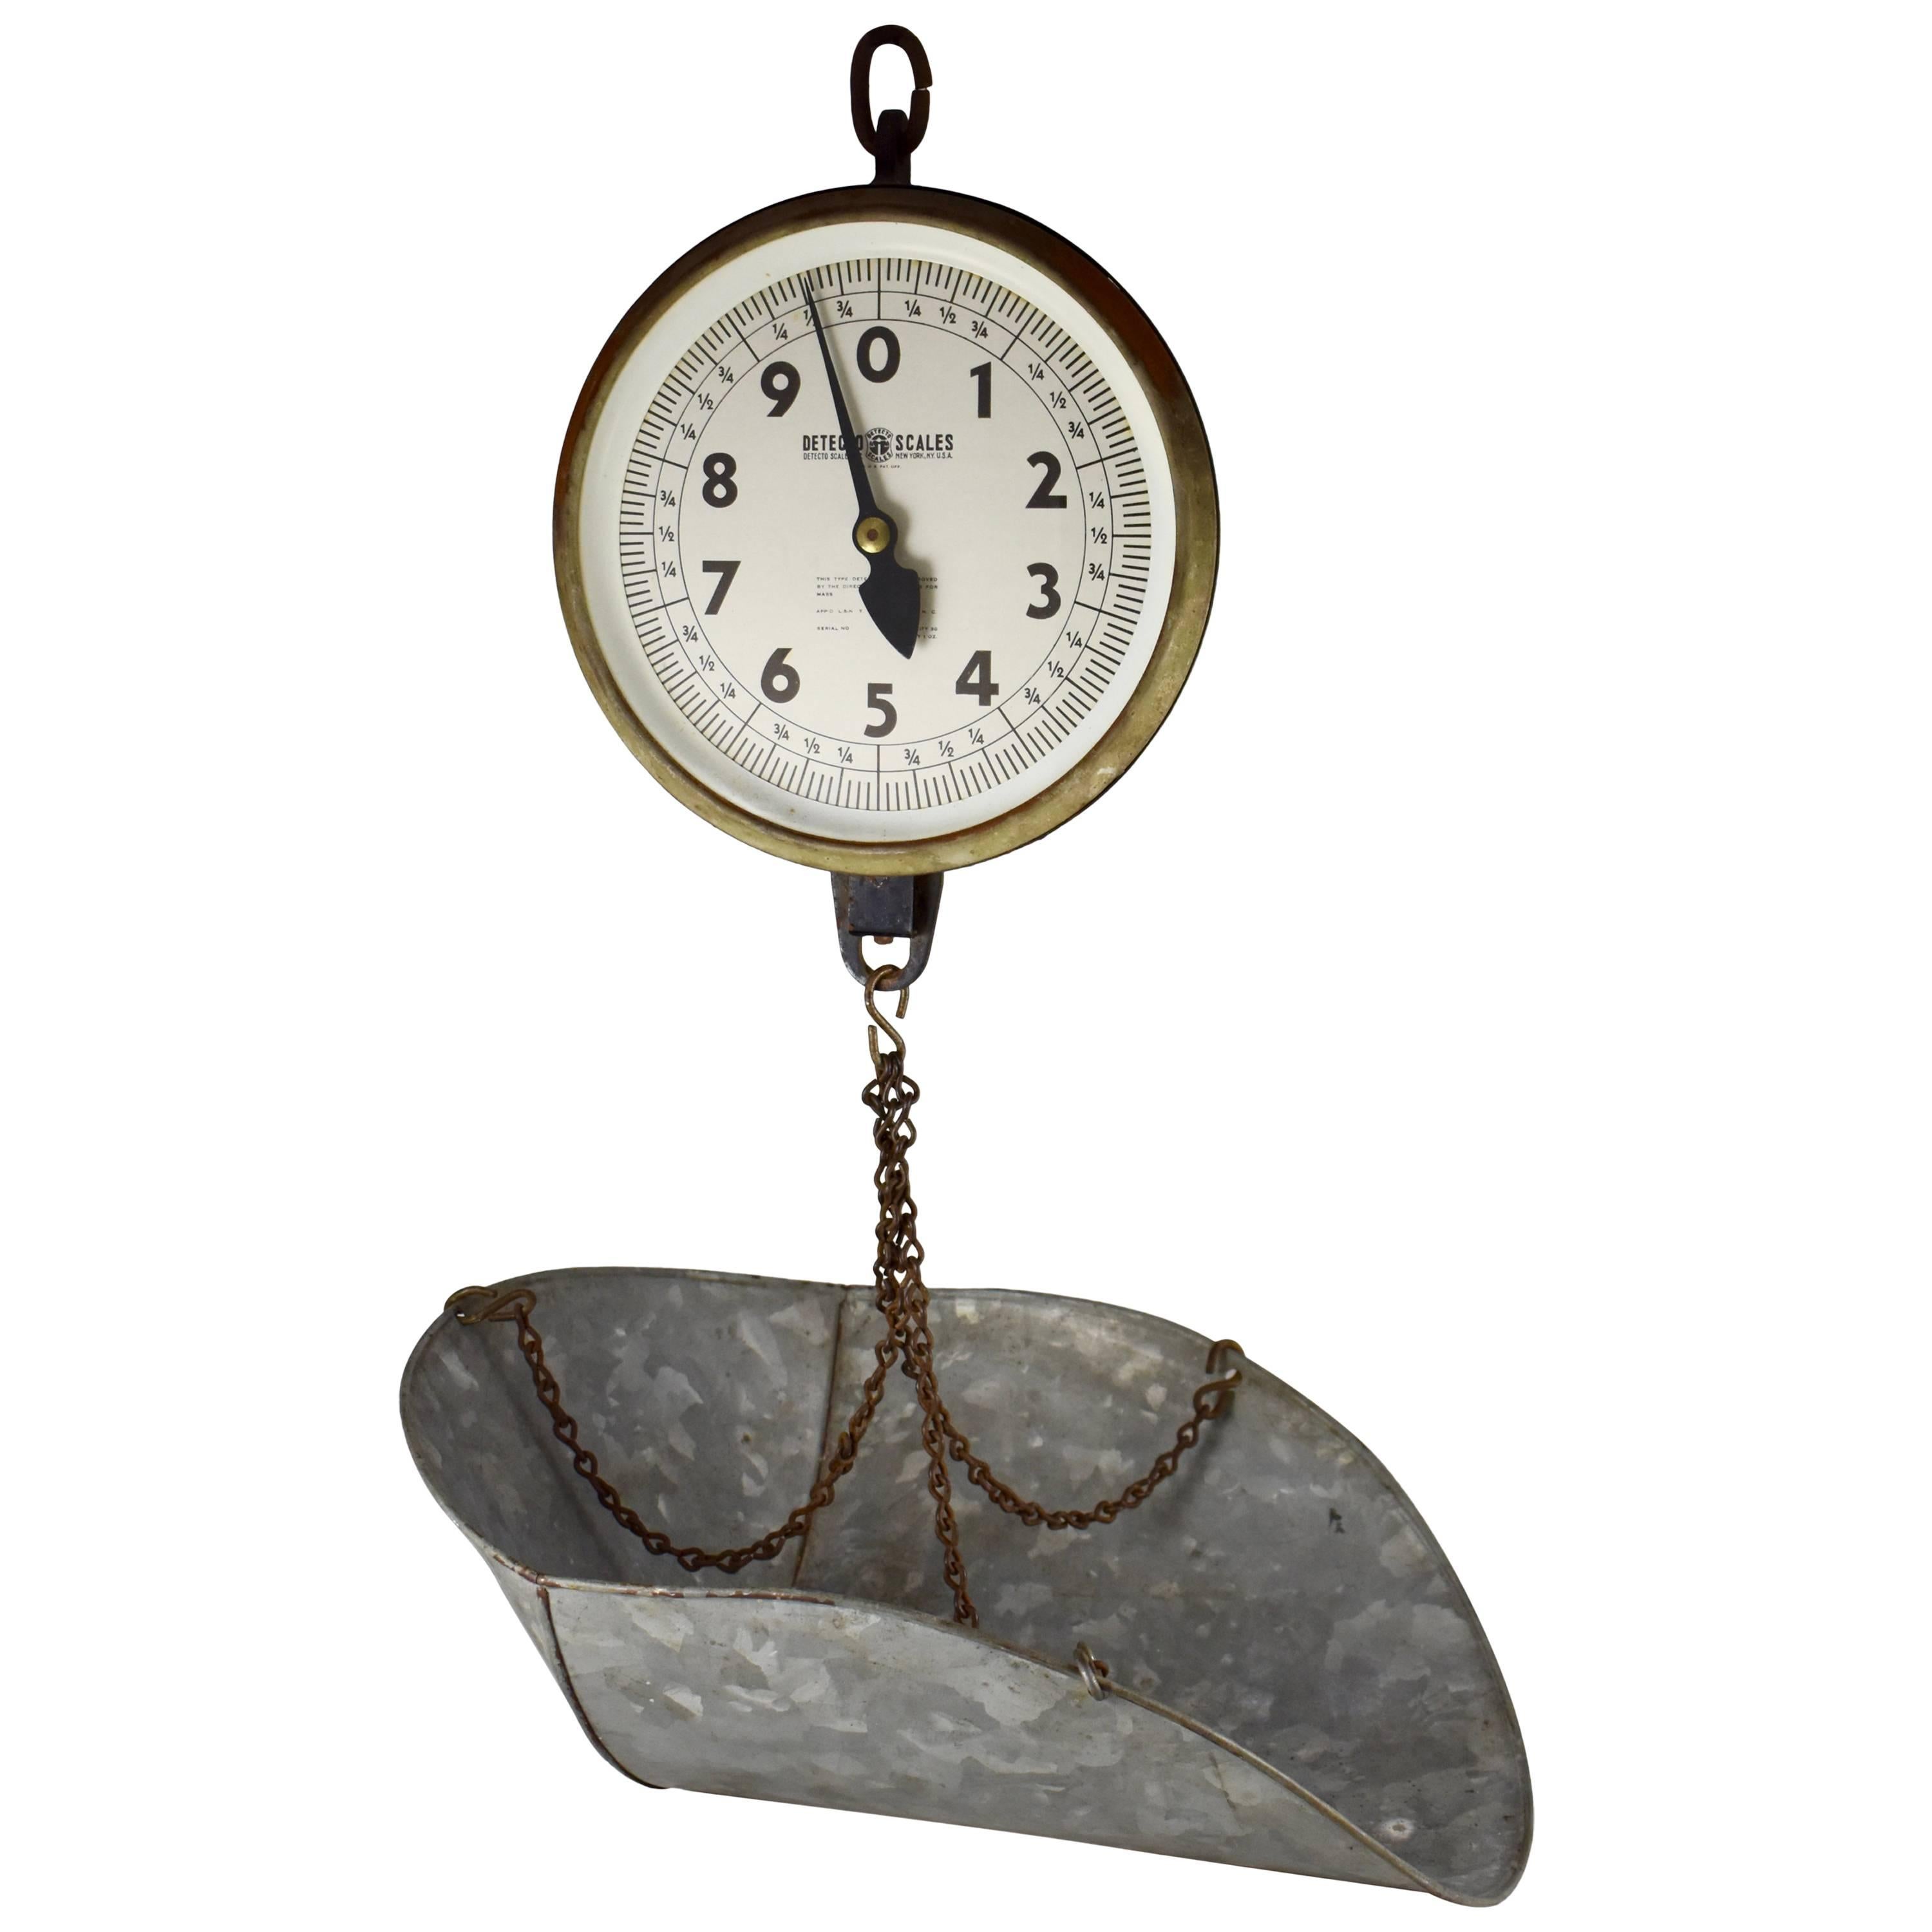 1930s Detecto Hanging Mercantile Produce Scale with Galvanized Steel Scoop